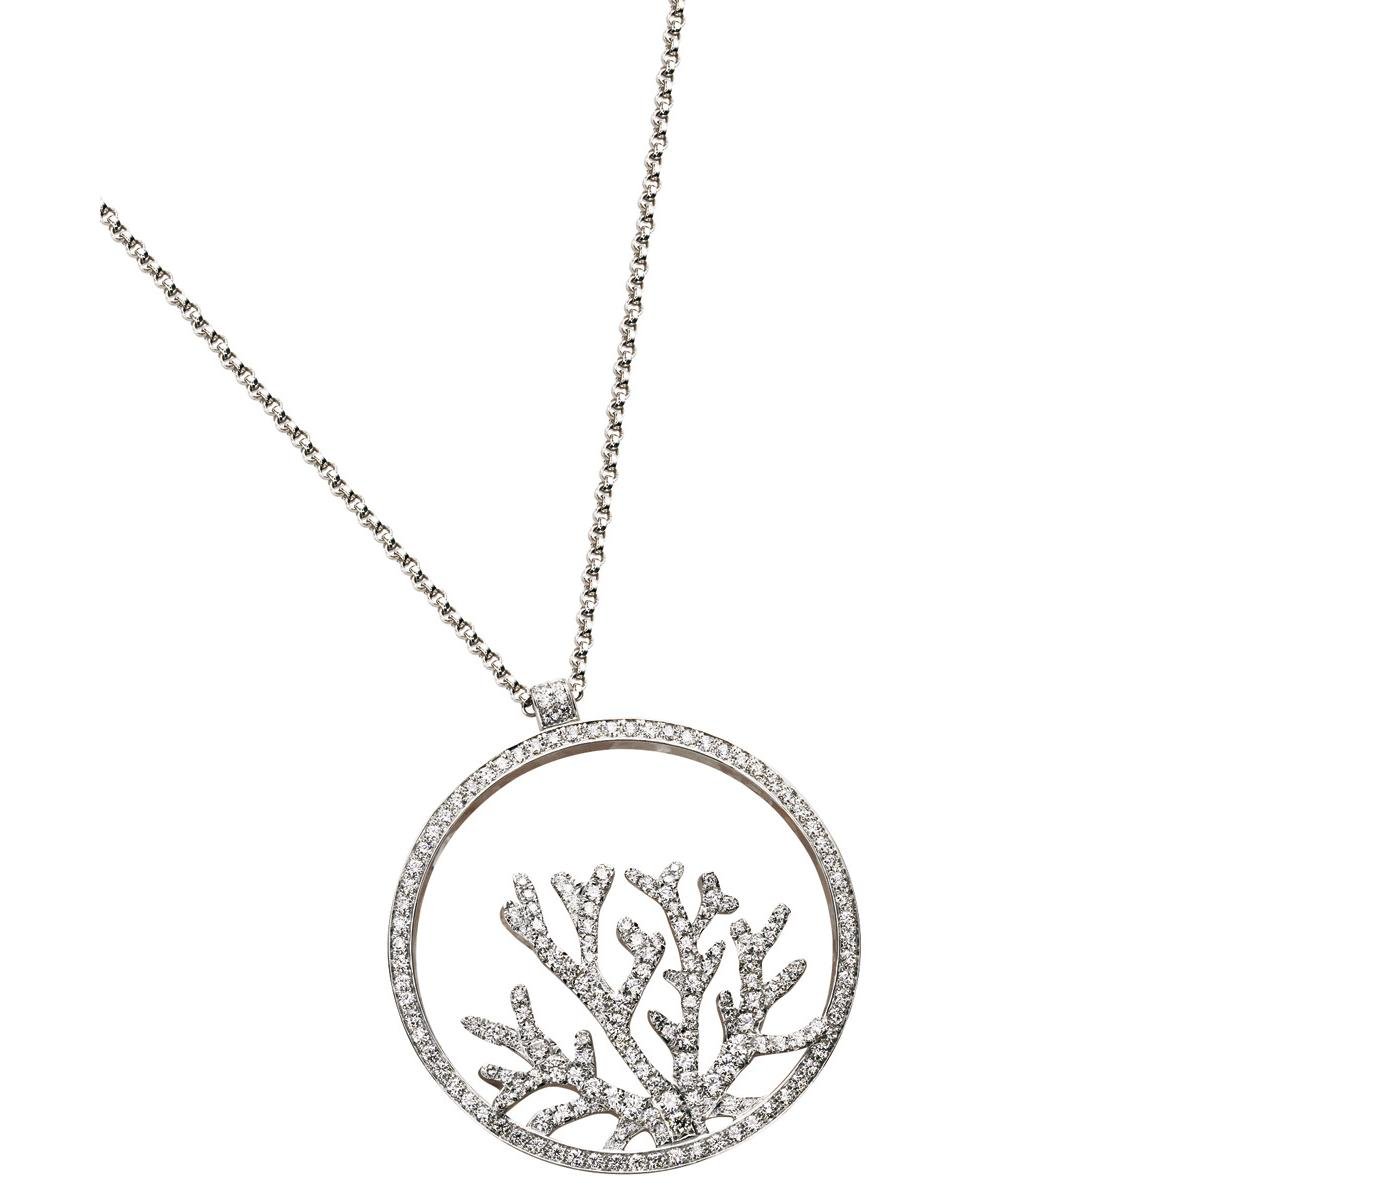 Pendant by Piaget